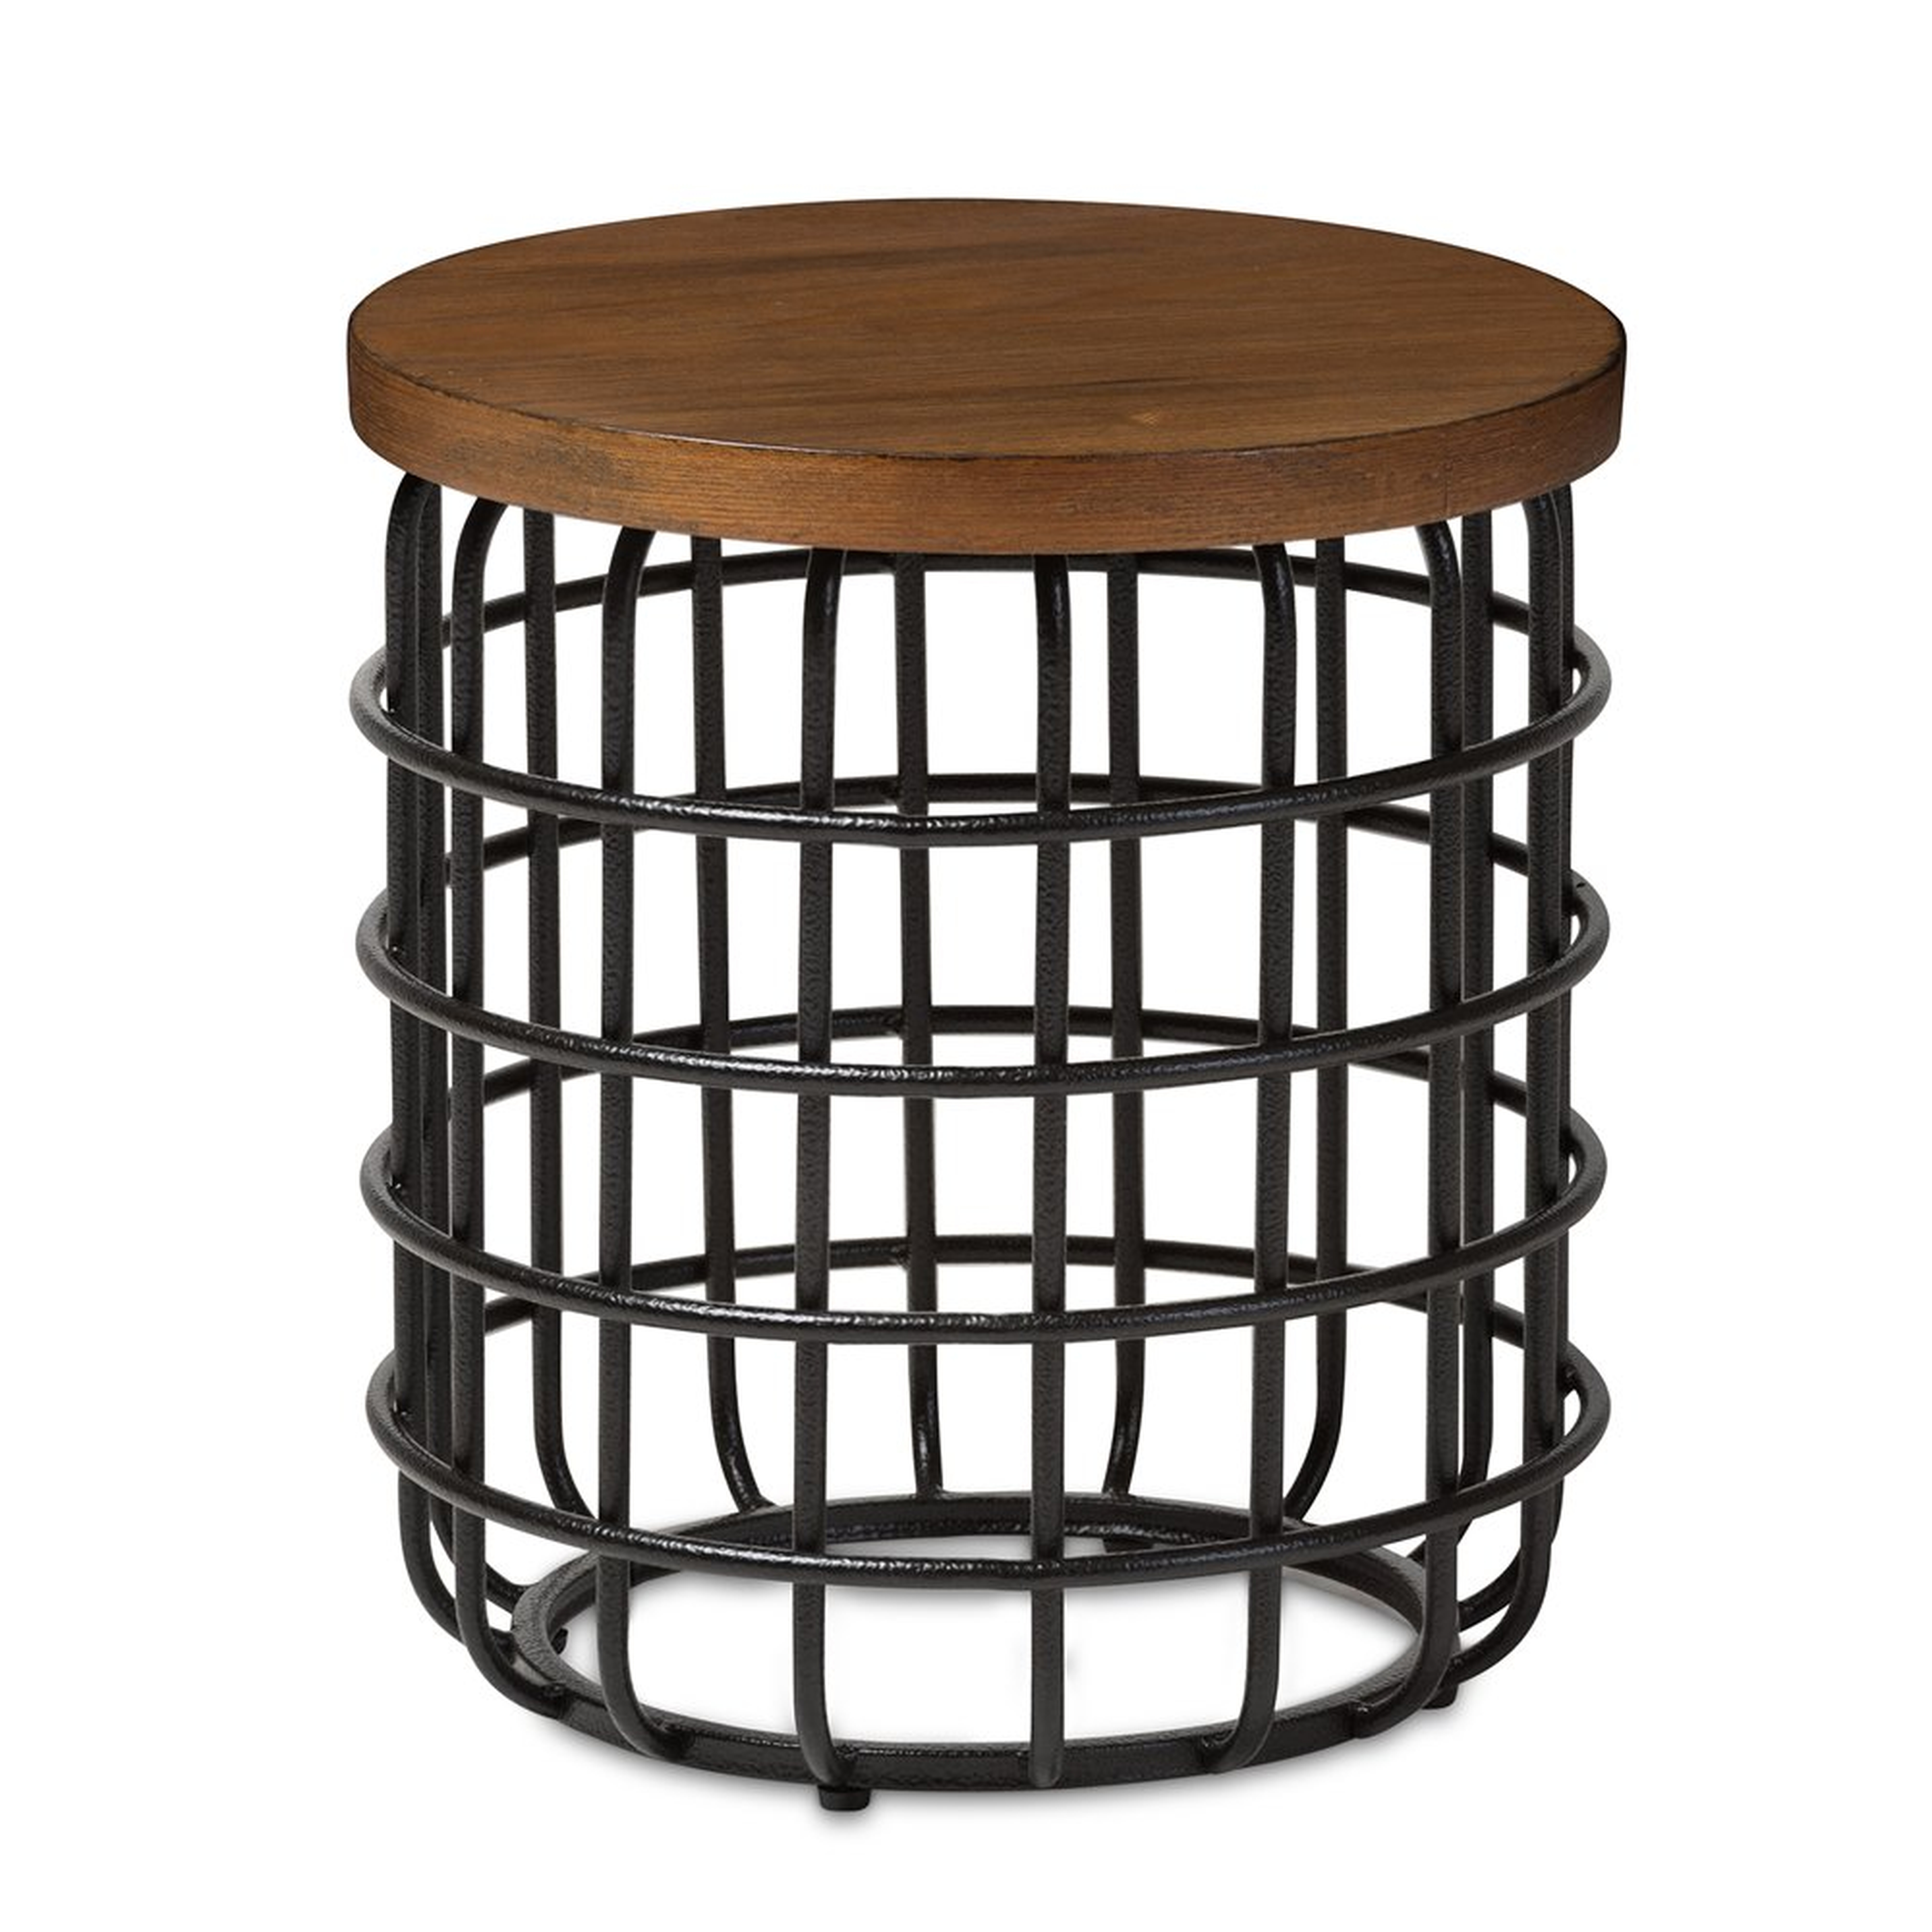 CARIE RUSTIC INDUSTRIAL STYLE ANTIQUE ACCENT TABLE - Lark Interiors